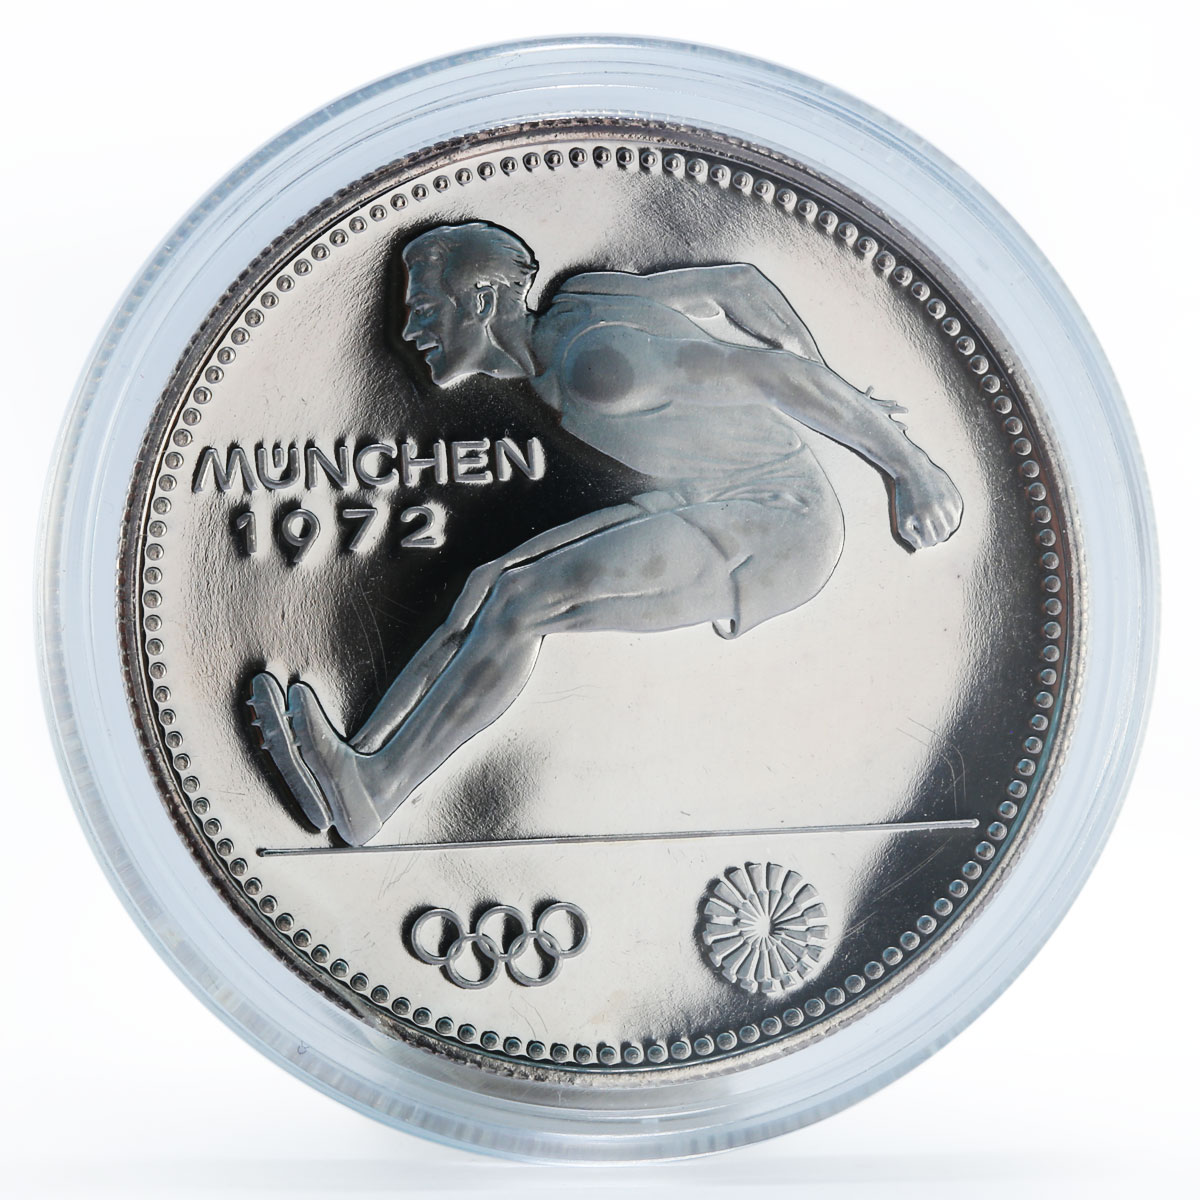 Paraguay 150 guaranies Munich Olympics Broad Jumper proof silver coin 1972